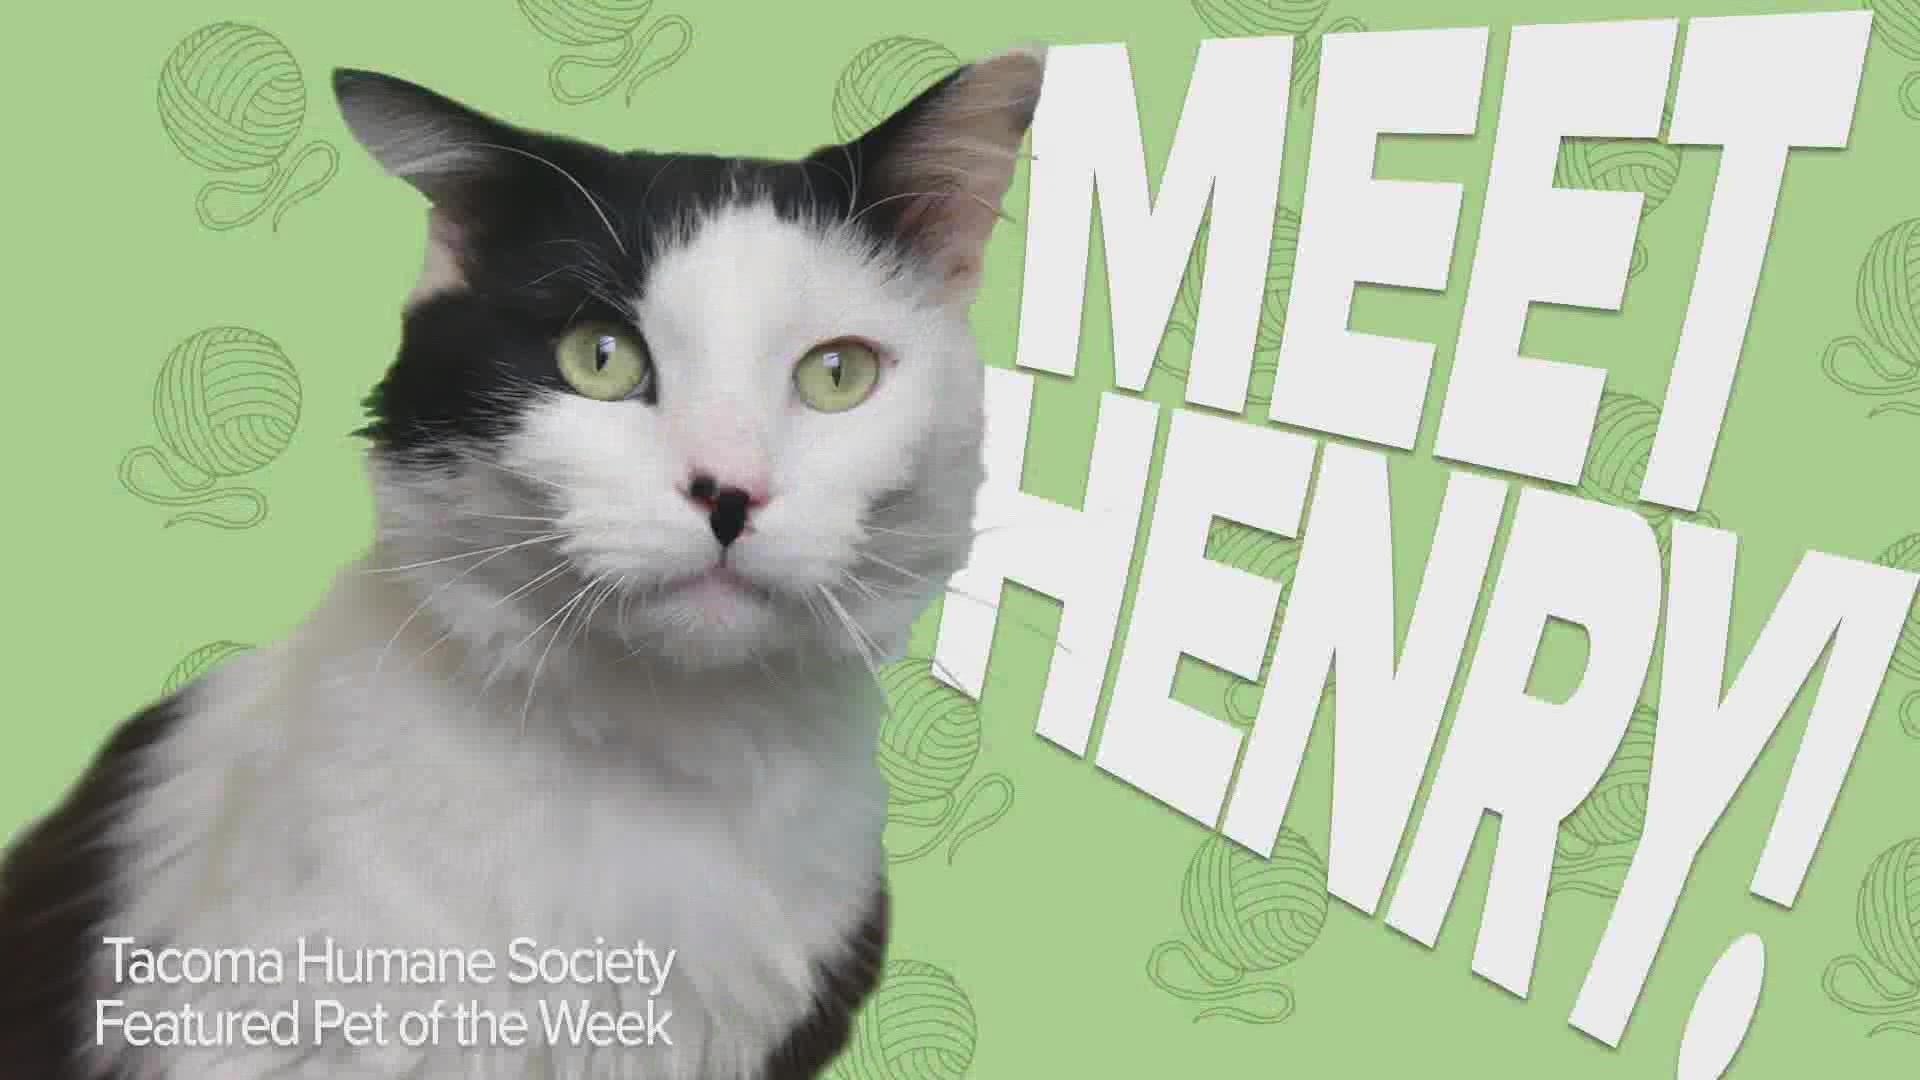 This week's featured rescue pet is Henry the cat!